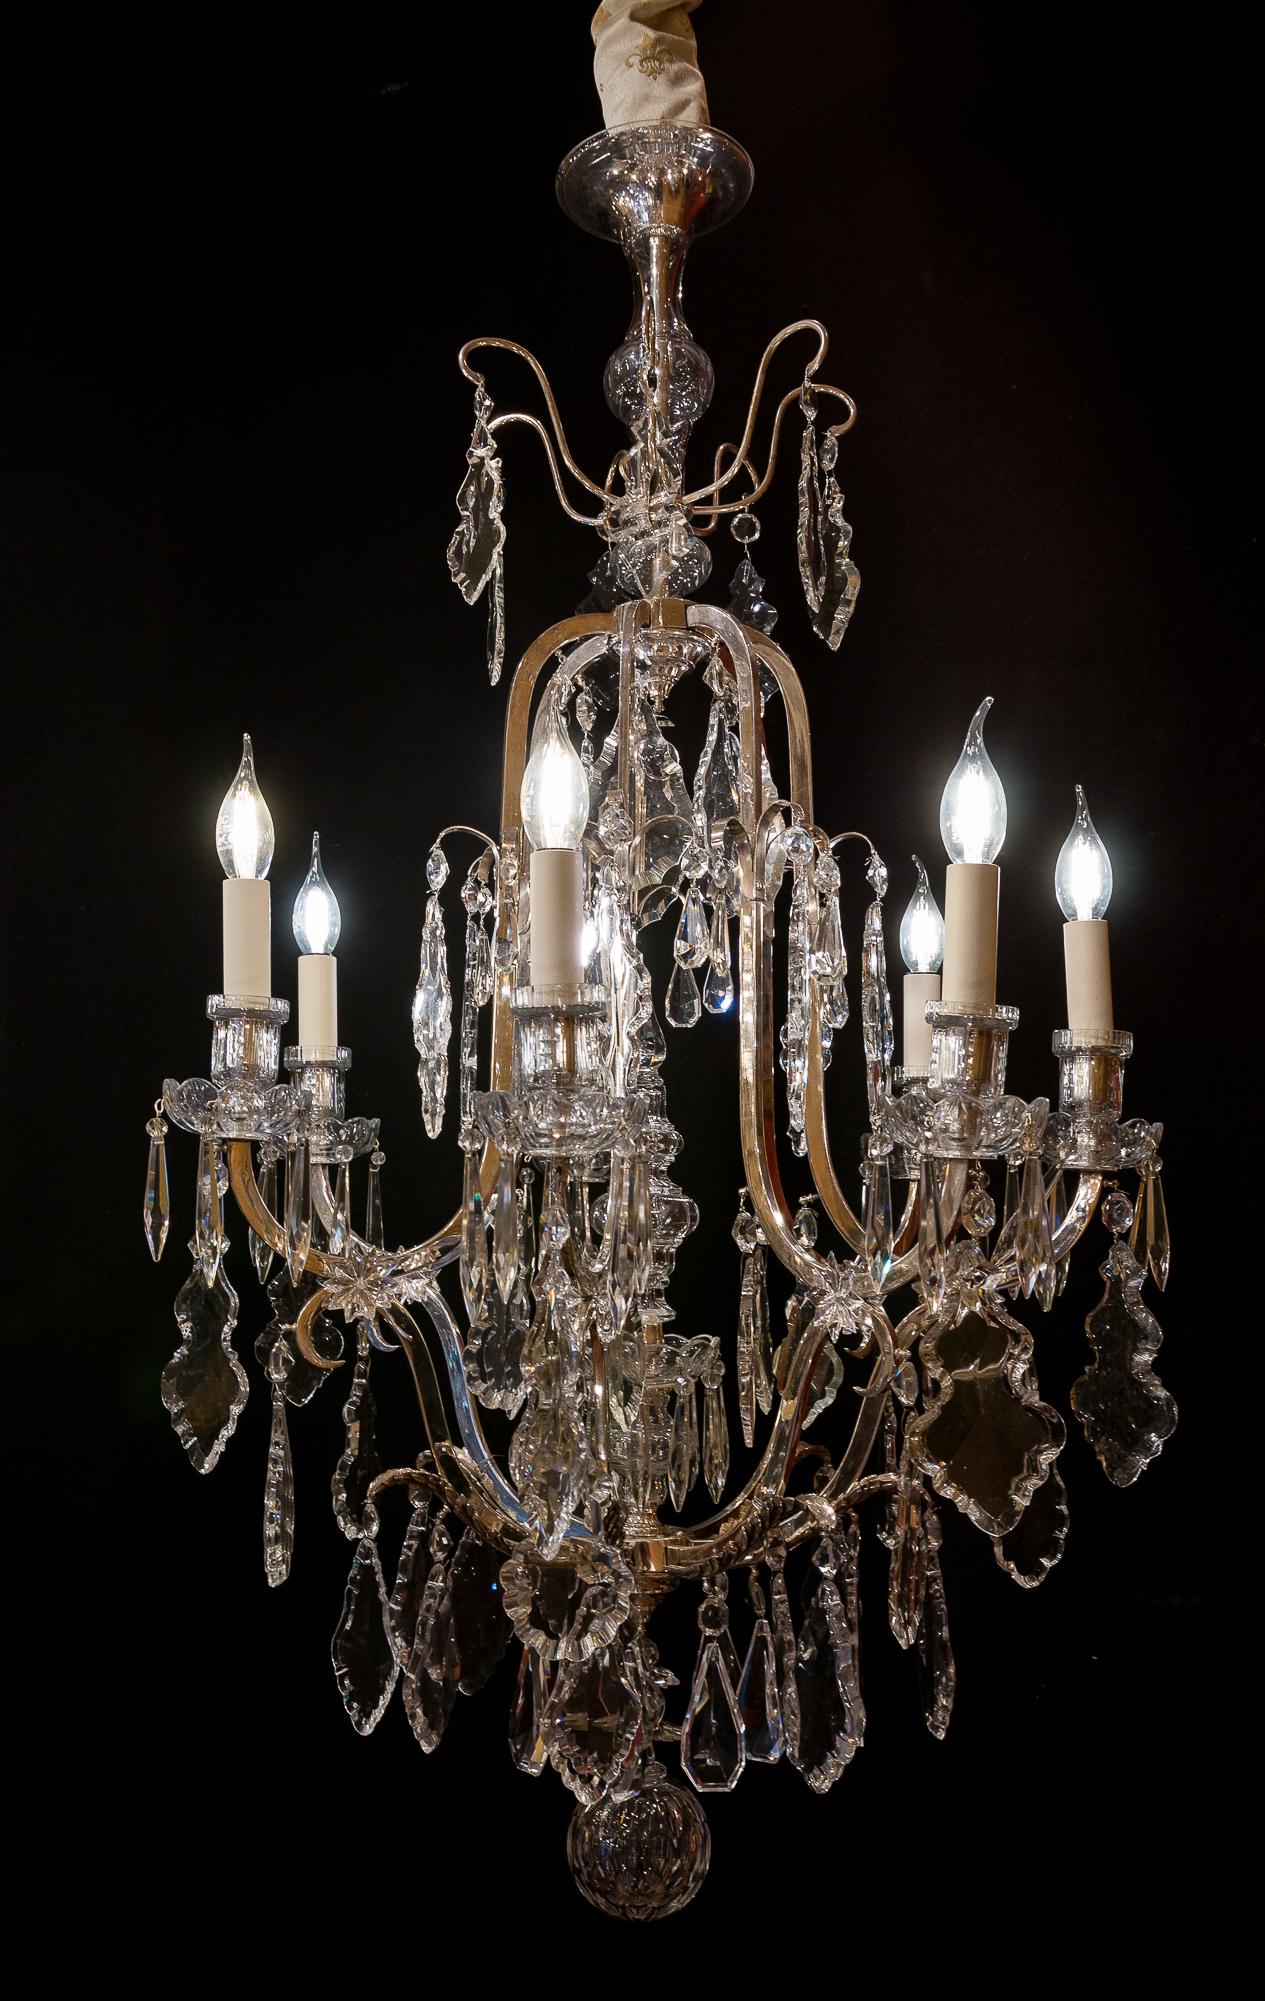 French Louis XV style, silver-plate and cut-crystal chandelier, circa 1920-1950.

Lovely silver-plate and cut crystal chandelier in the classic French Louis XV style.
Our chandelier is composed of seven perimeter arm-lights.
Excellent quality